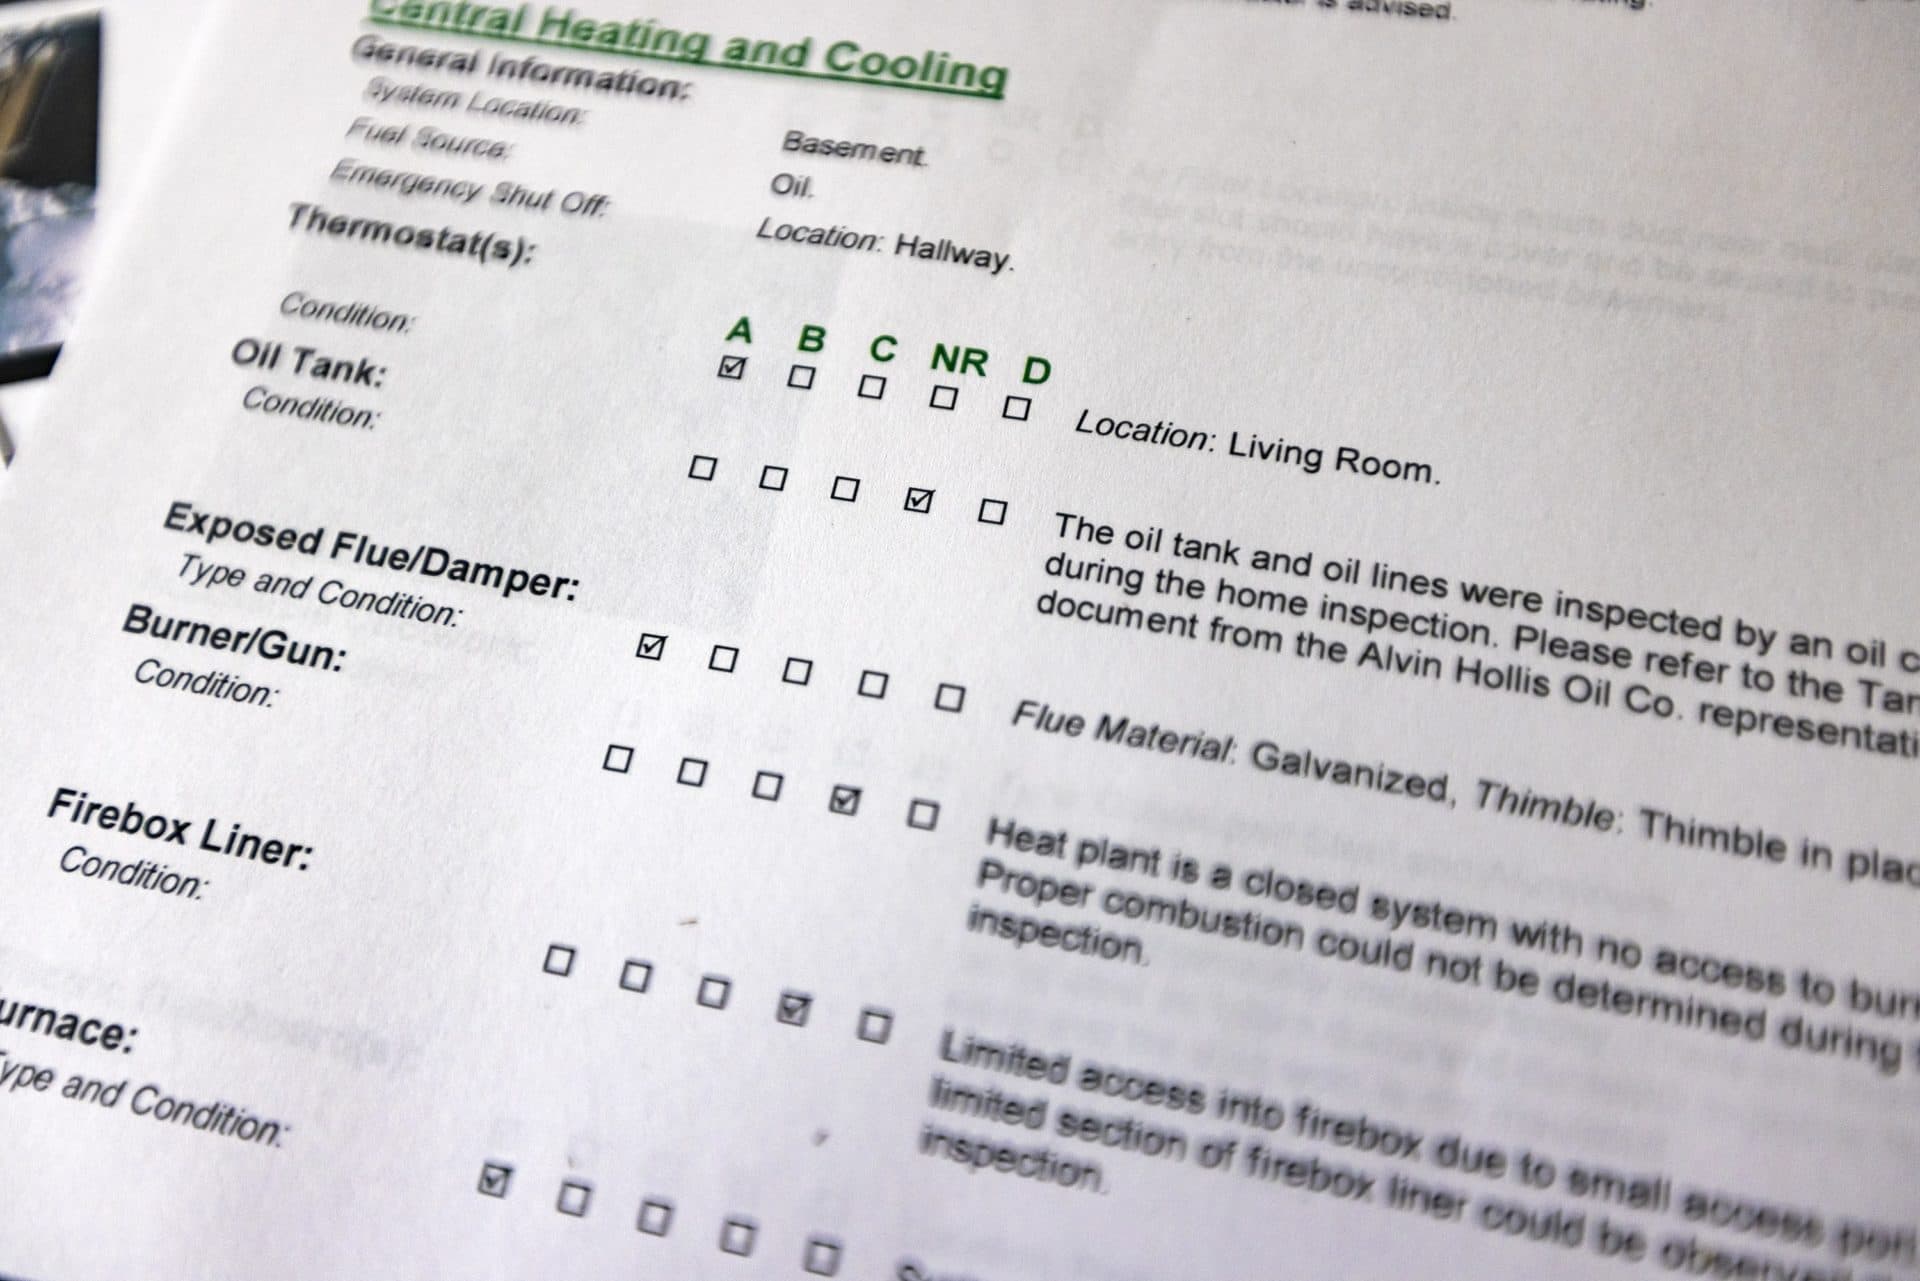 Each report produced by Tiger Home Inspection contains a checklist of items inspected and graded. (Jesse Costa/WBUR)